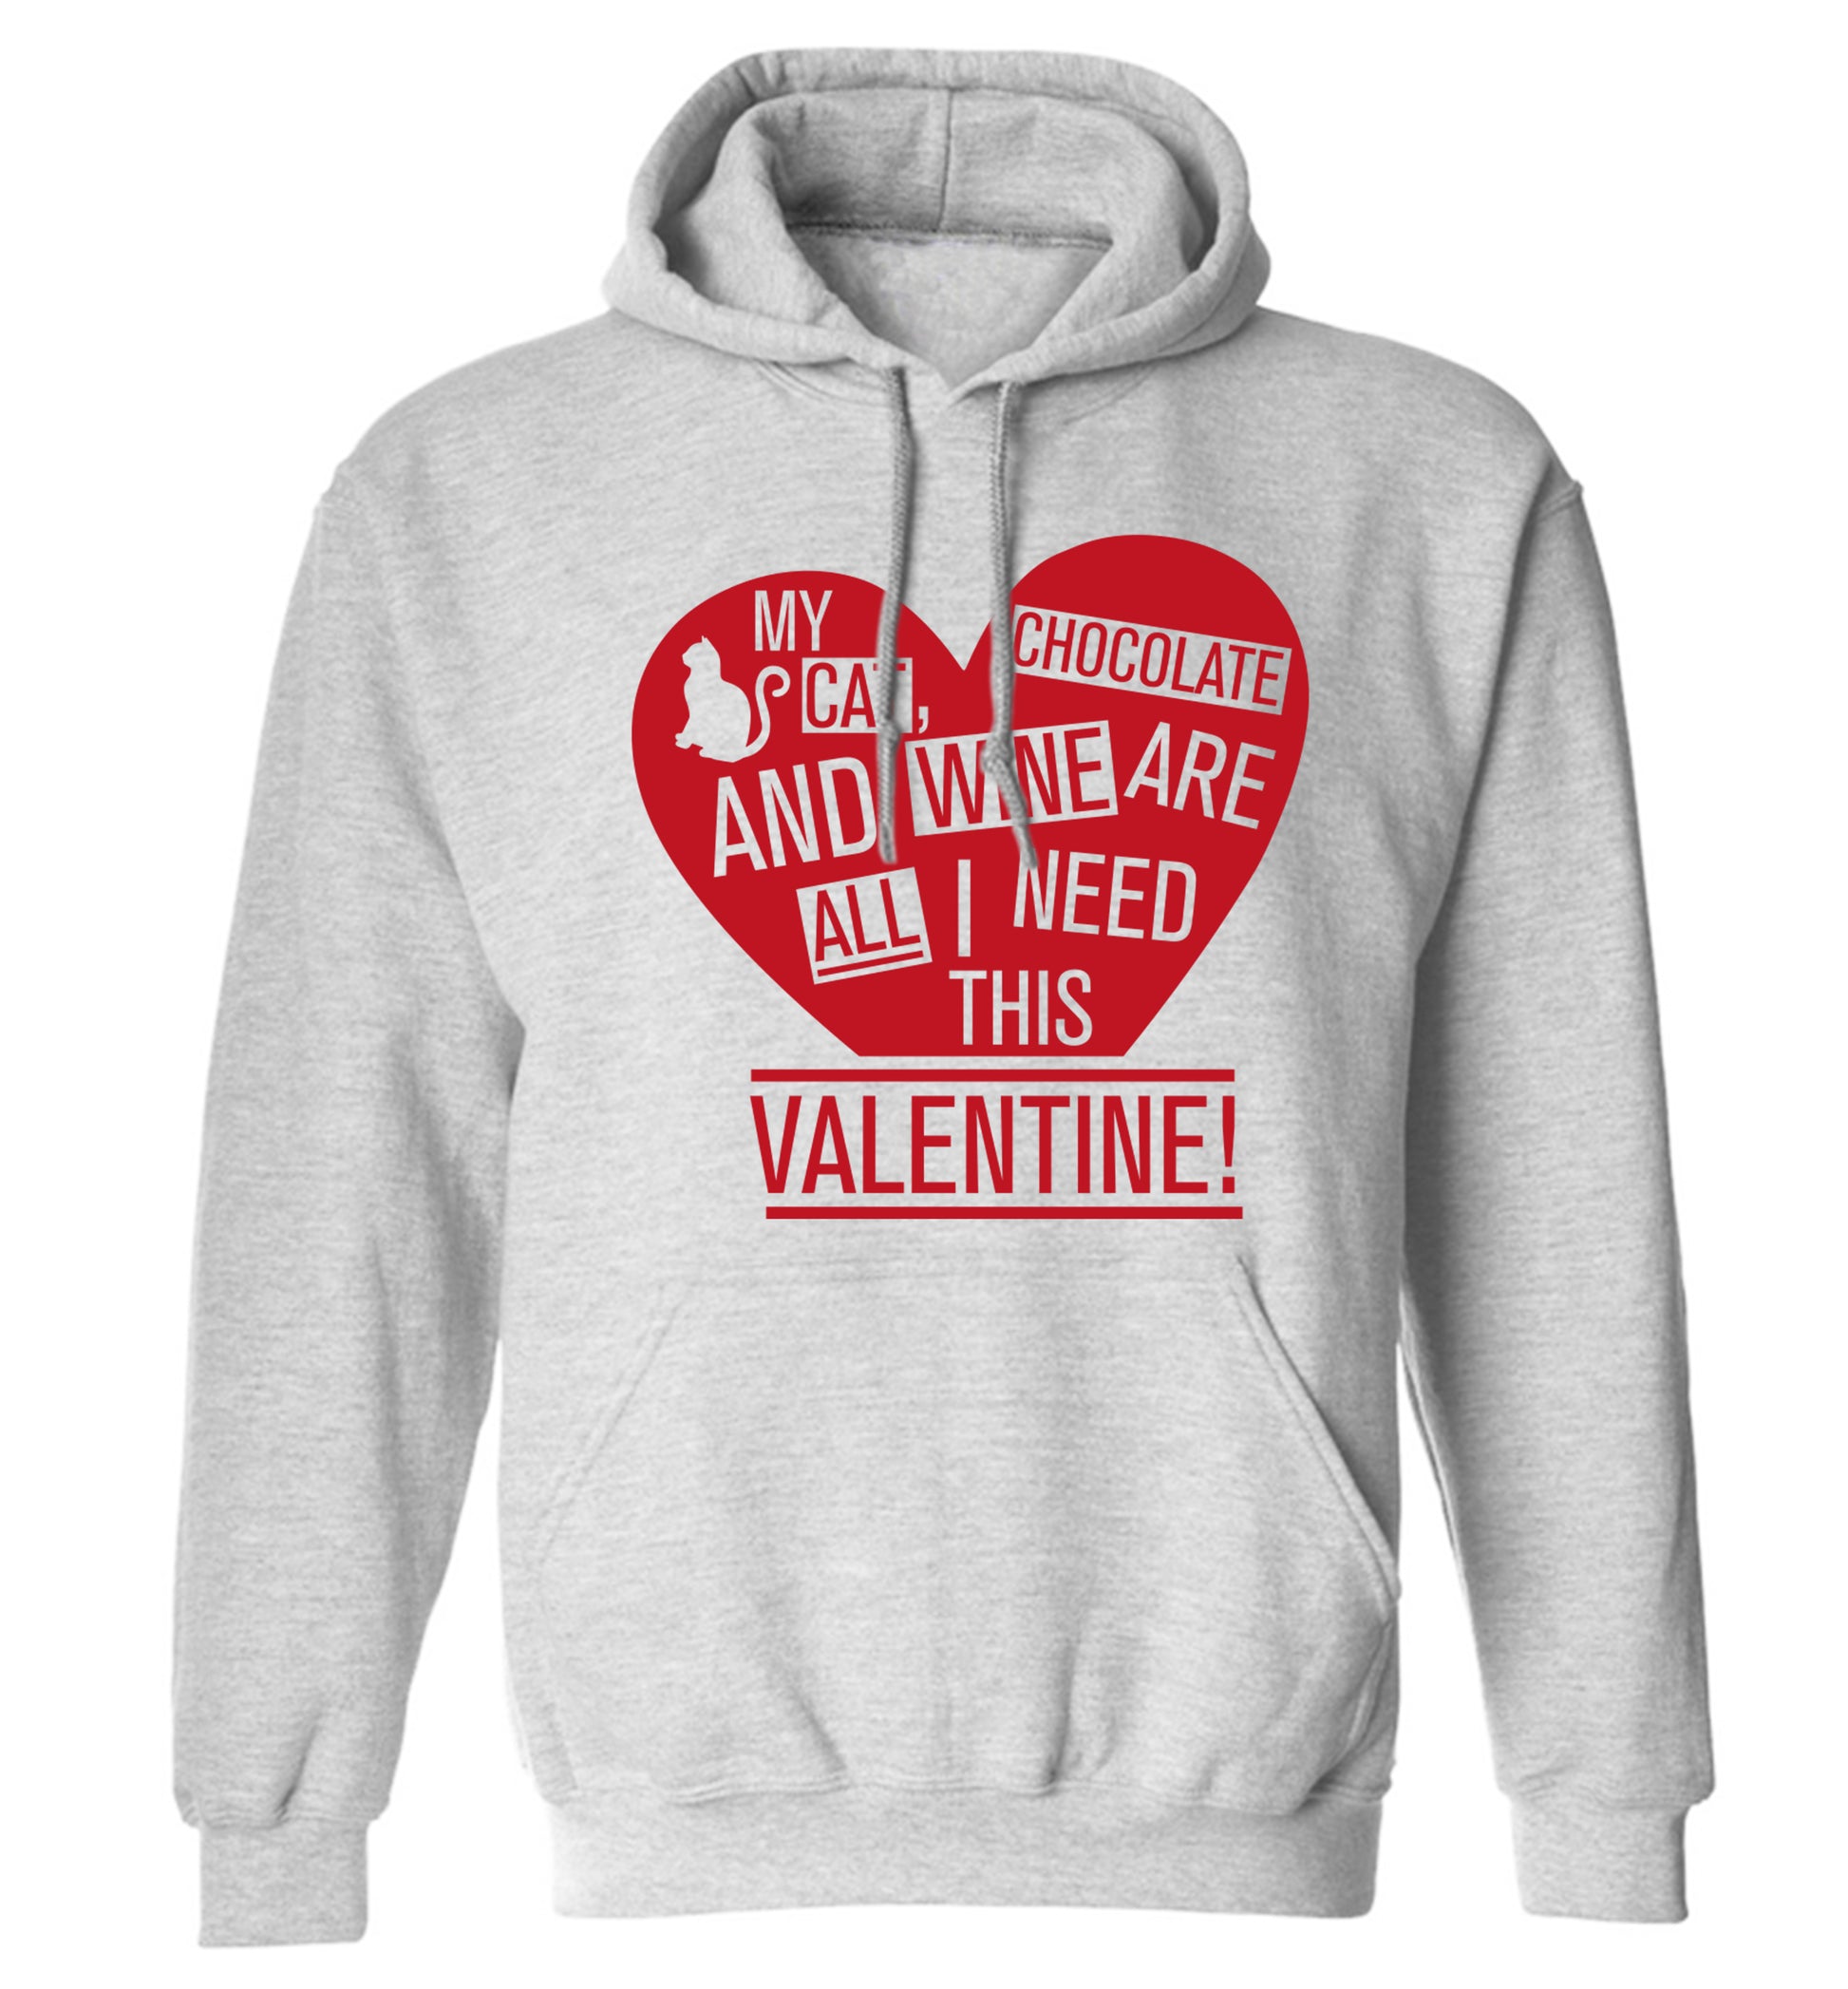 My cat, chocolate and wine are all I need this valentine! adults unisex grey hoodie 2XL